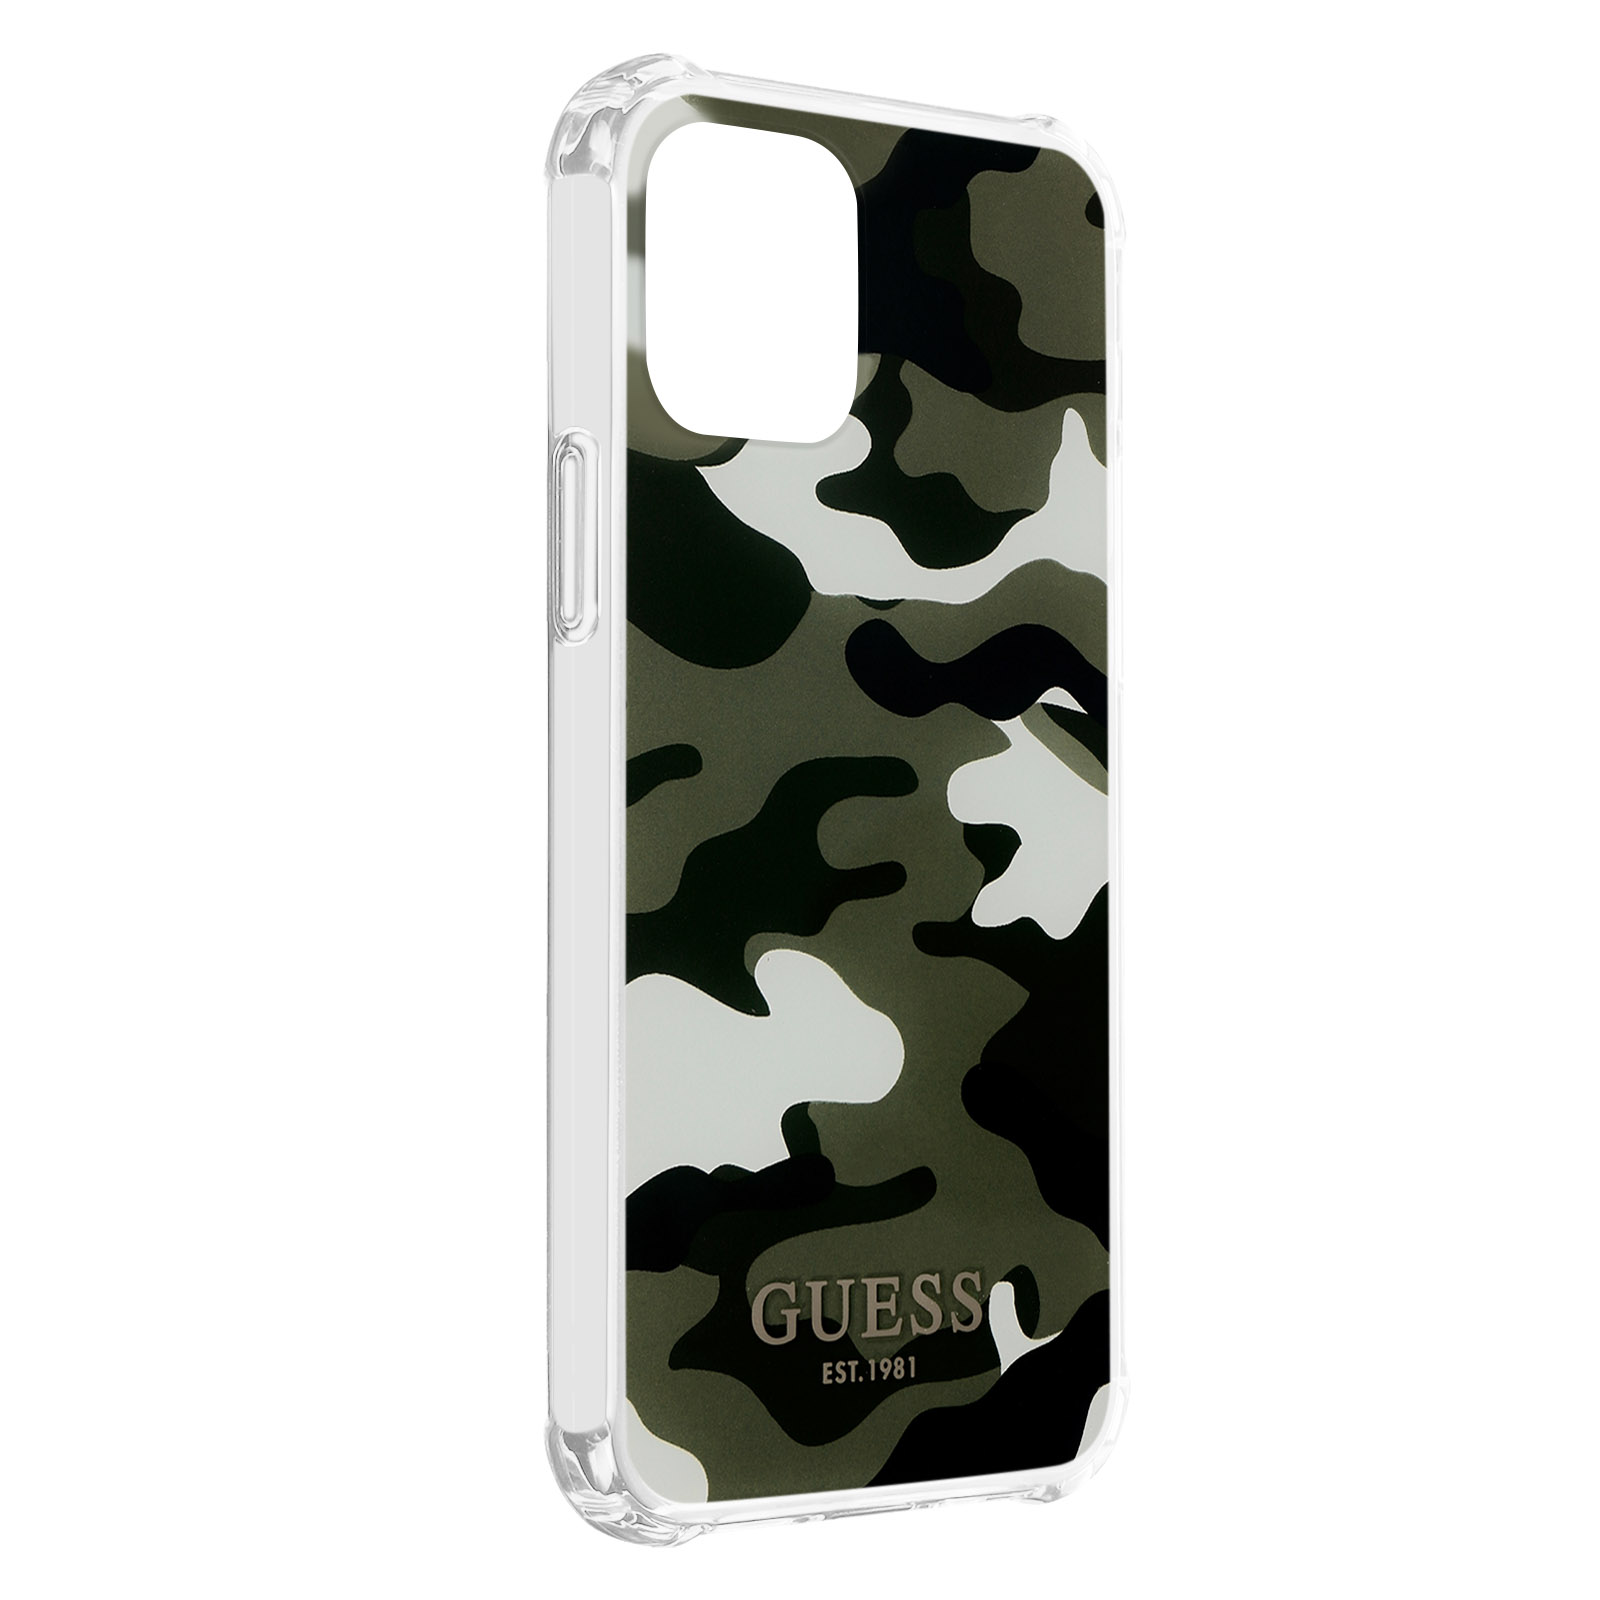 GUESS Camouflage Series, Max, iPhone Pro 12 Backcover, Grün Apple